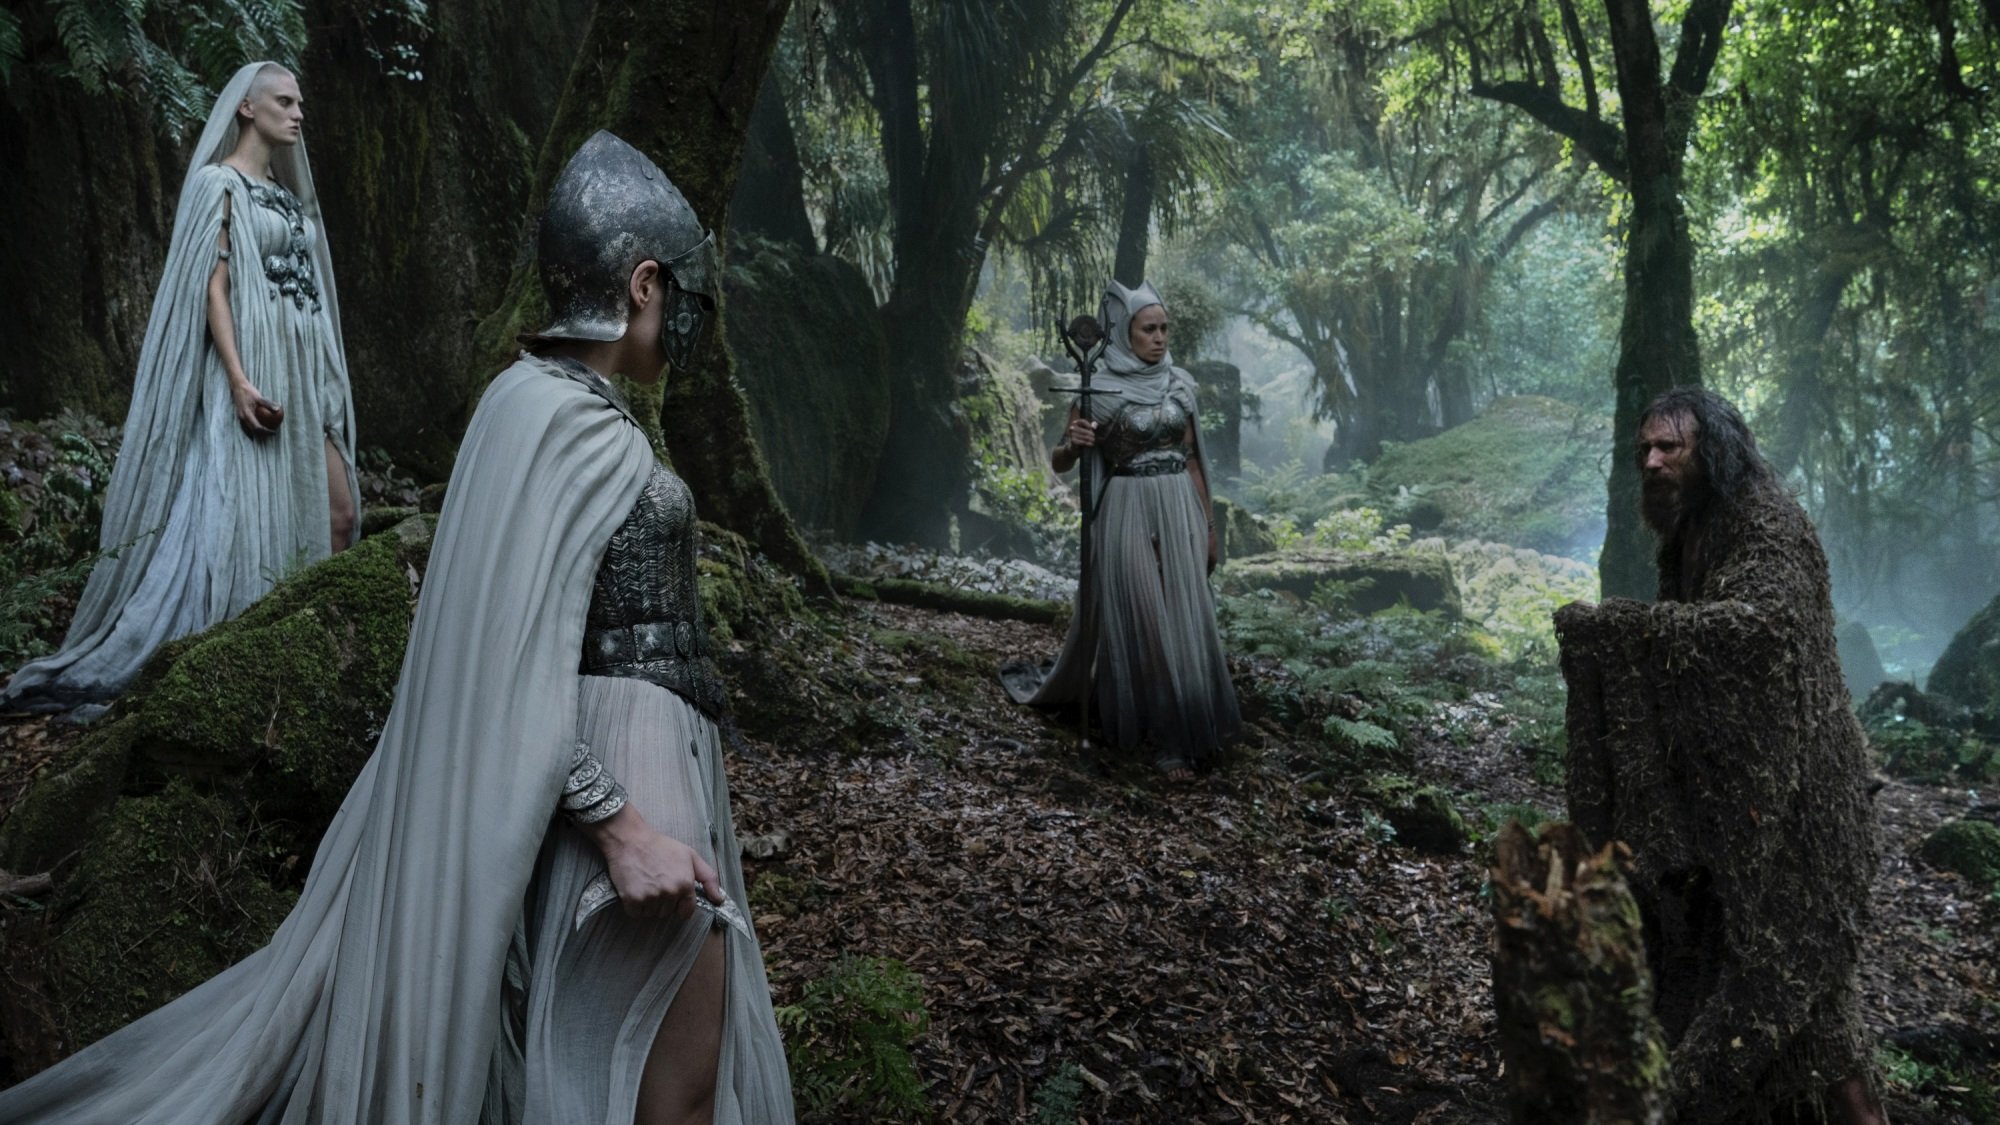 A tall man in a brown disheveled robe faces off against three imposing white-cloaked women in a forest.